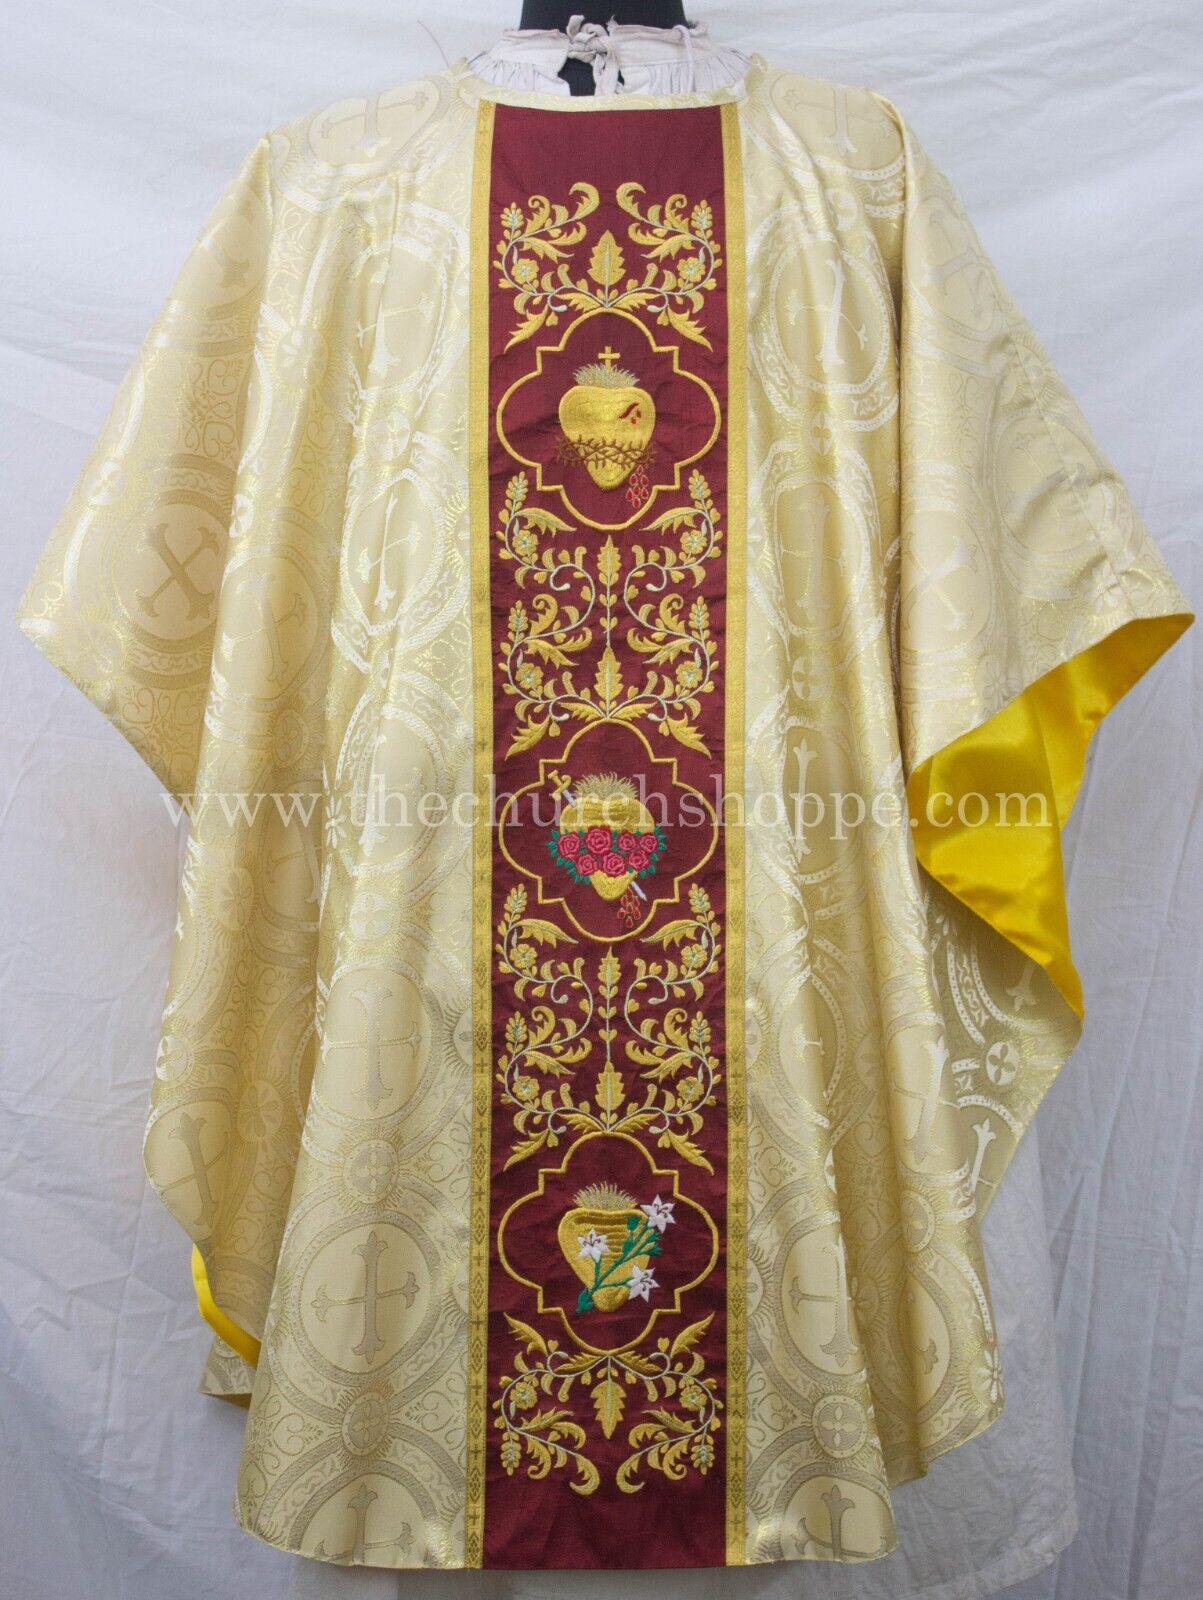 Metallic Gold Gothic Vestment  & 5 pc mass set with Three Holy Hearts Embroidery